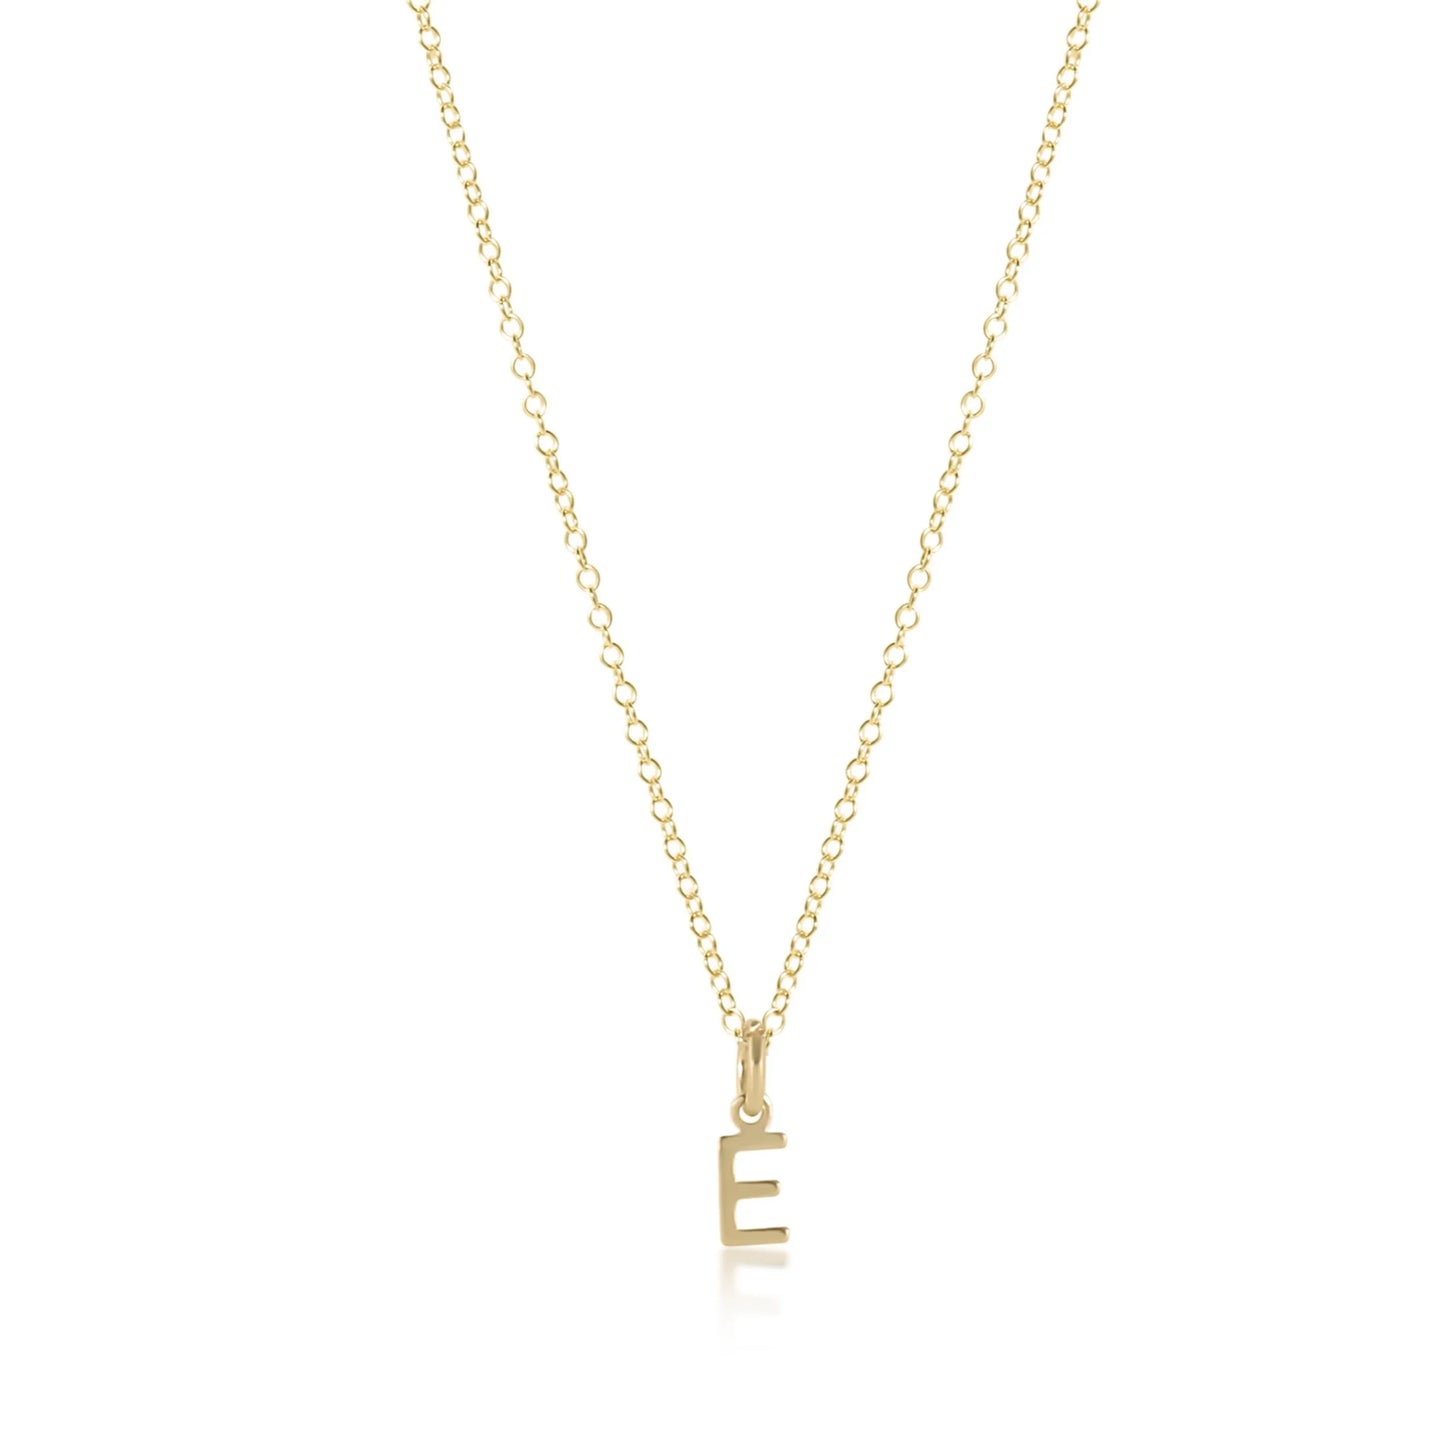 16" Initial Necklace - gold